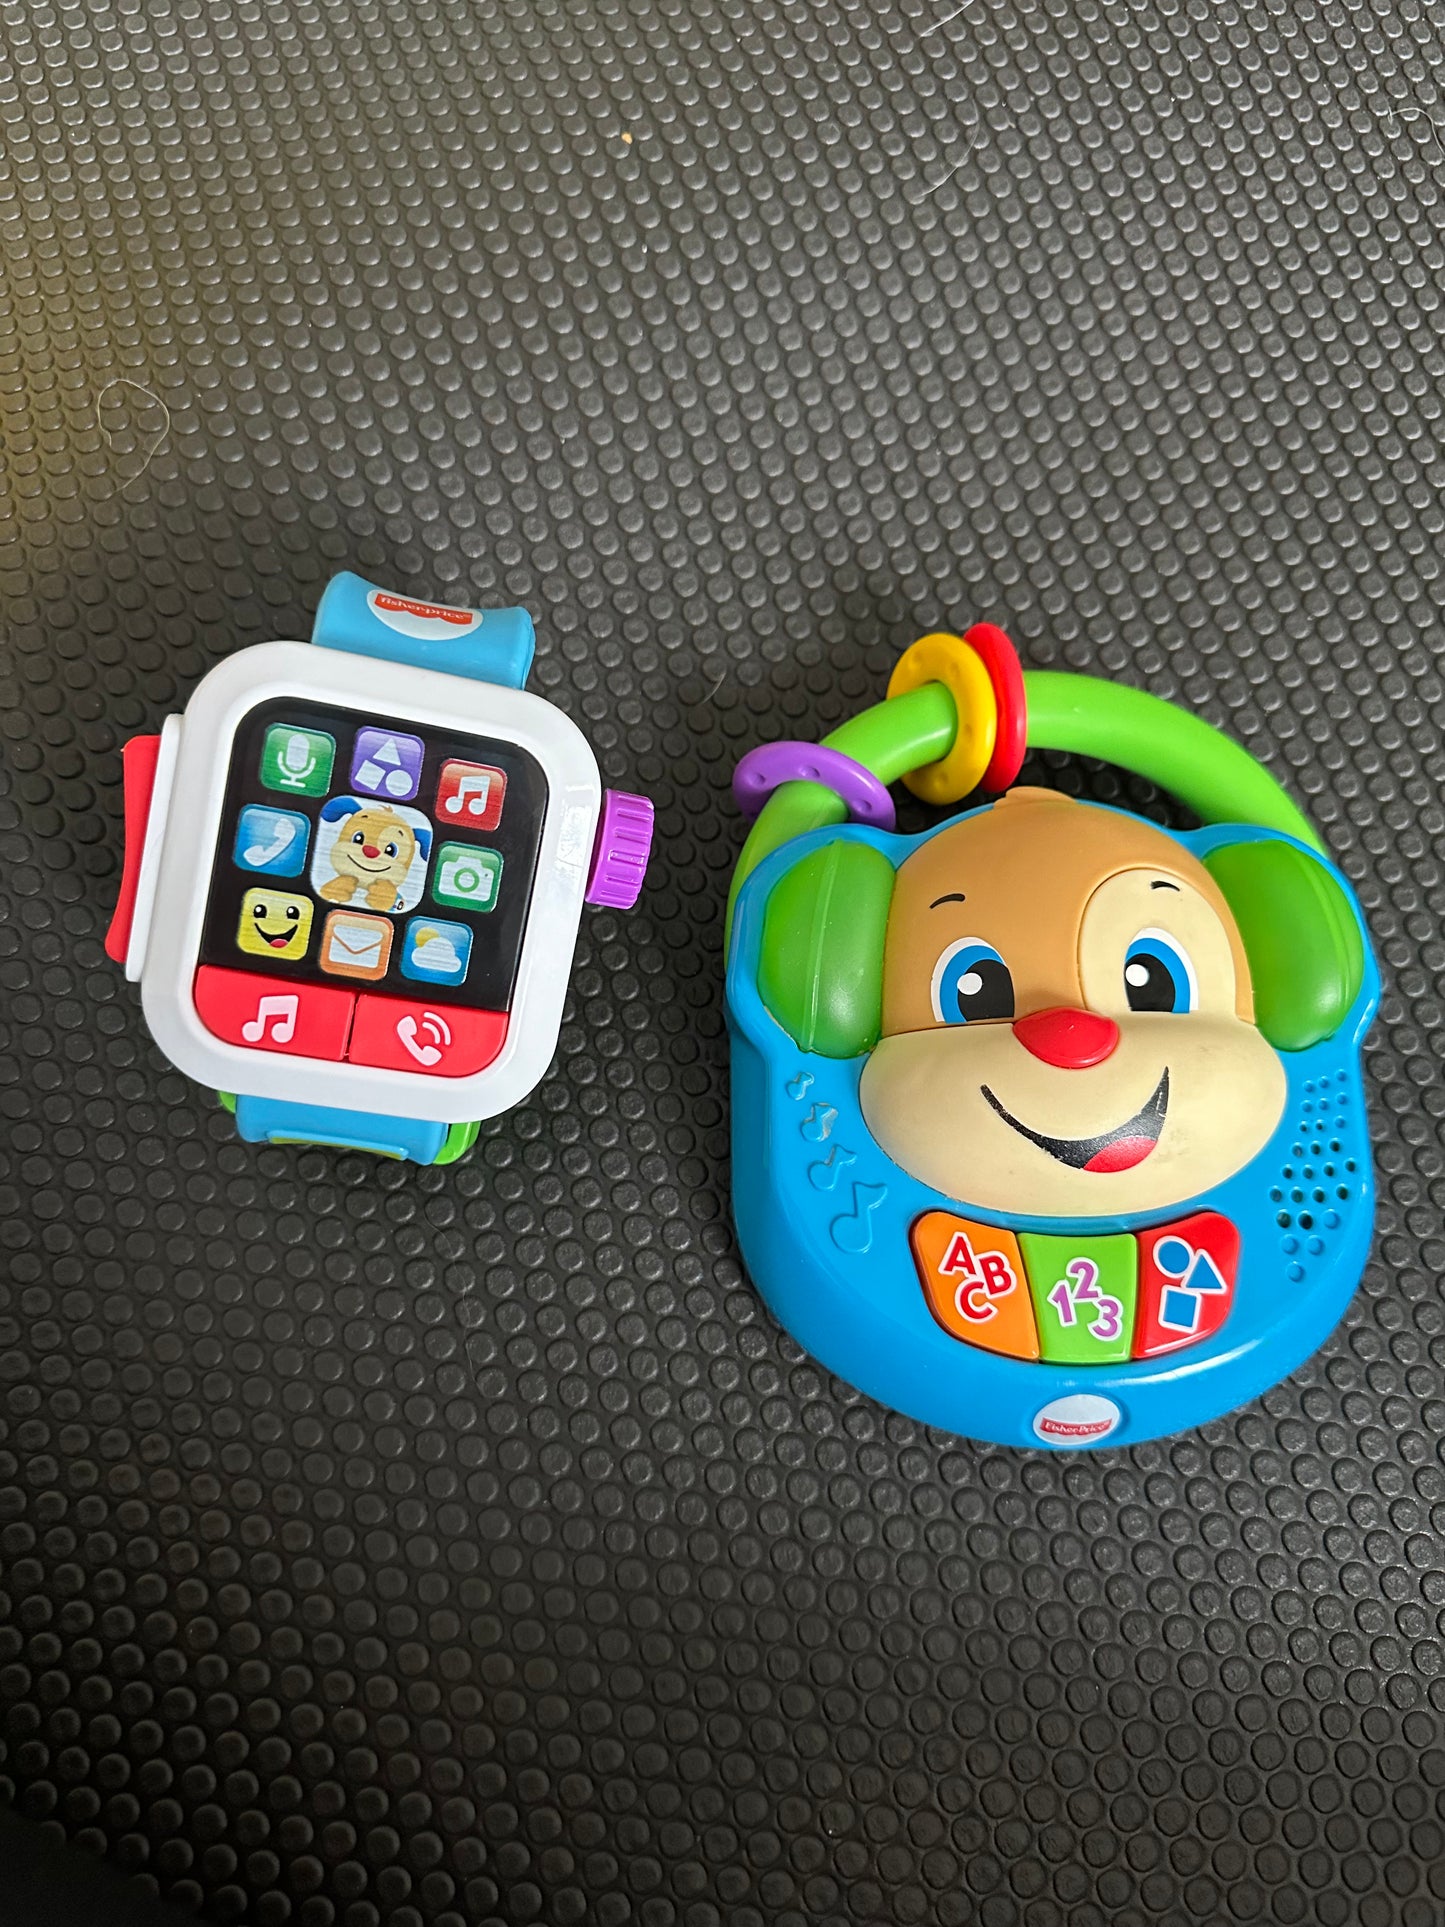 toy watch and play 'radio'